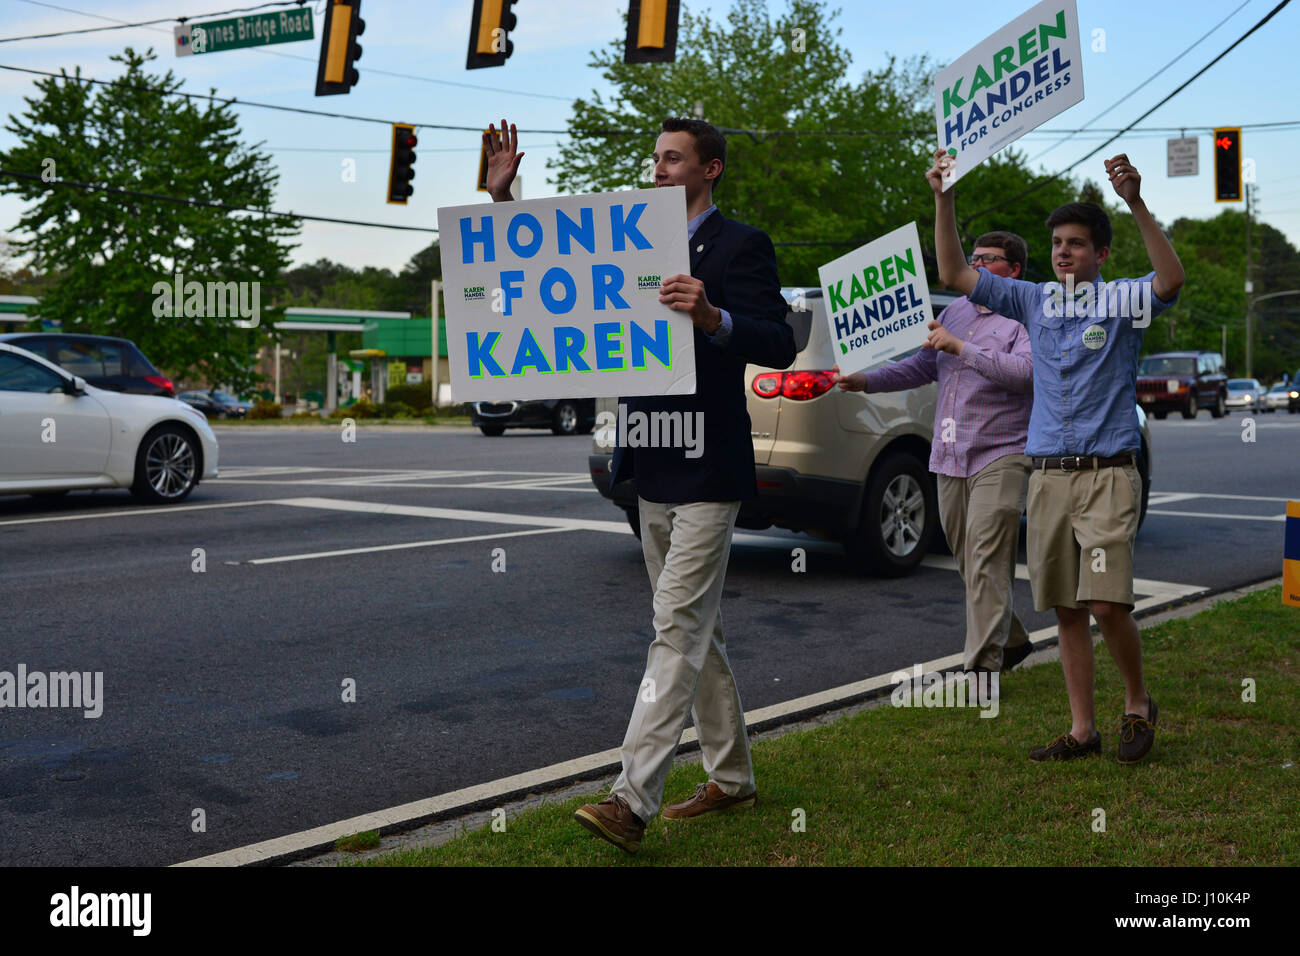 Atlanta, Georgia, USA. 17th Apr, 2017. Jack Miller, Jake Muelibauer and Max Woodcock, campaign for Georgia GOP candidate for Congress Karen Handel in suburban Atlanta Monday. Georgia's 6th Congressional district holds its nationally-watched special election Tuesday to fill the seat vacated by Republican Tom Price, and Handel is in a tight race with Democrat Jon Ossoff, who is riding anti-Trump sentiment and has a chance to win the seat for Democrats for the first time in decades Credit: Miguel Juarez Lugo/ZUMA Wire/Alamy Live News Stock Photo